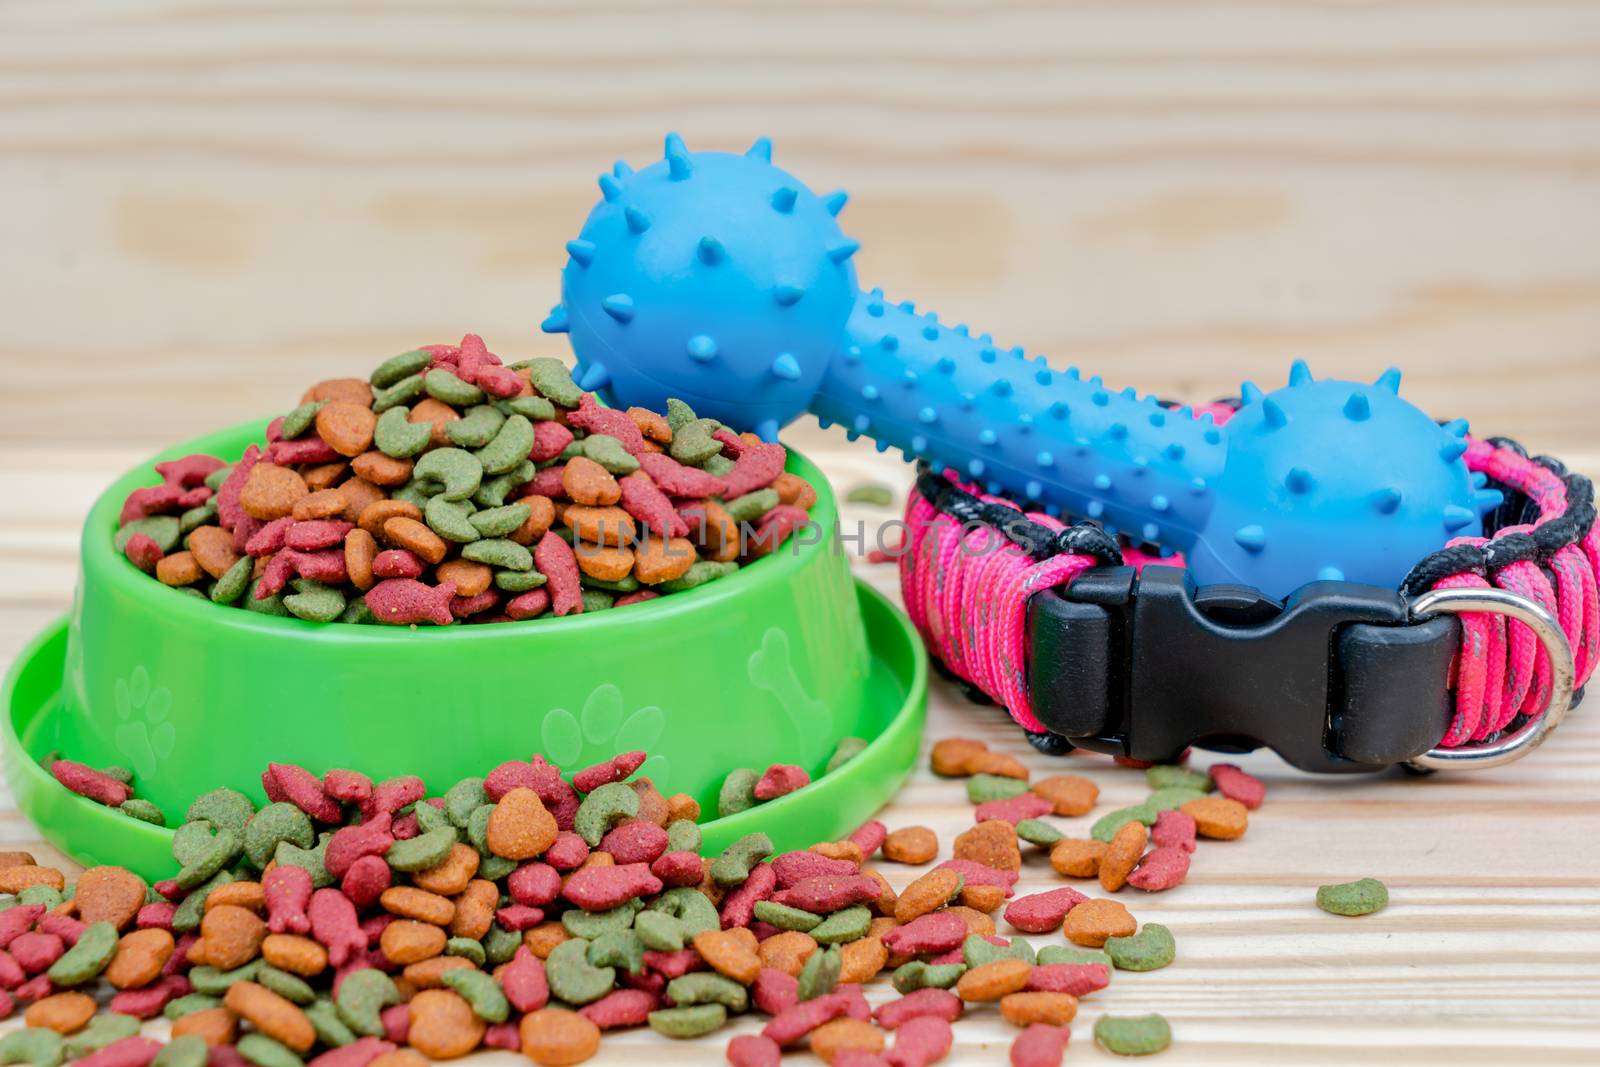 Pet food with rubber toy on wooden background by Buttus_casso